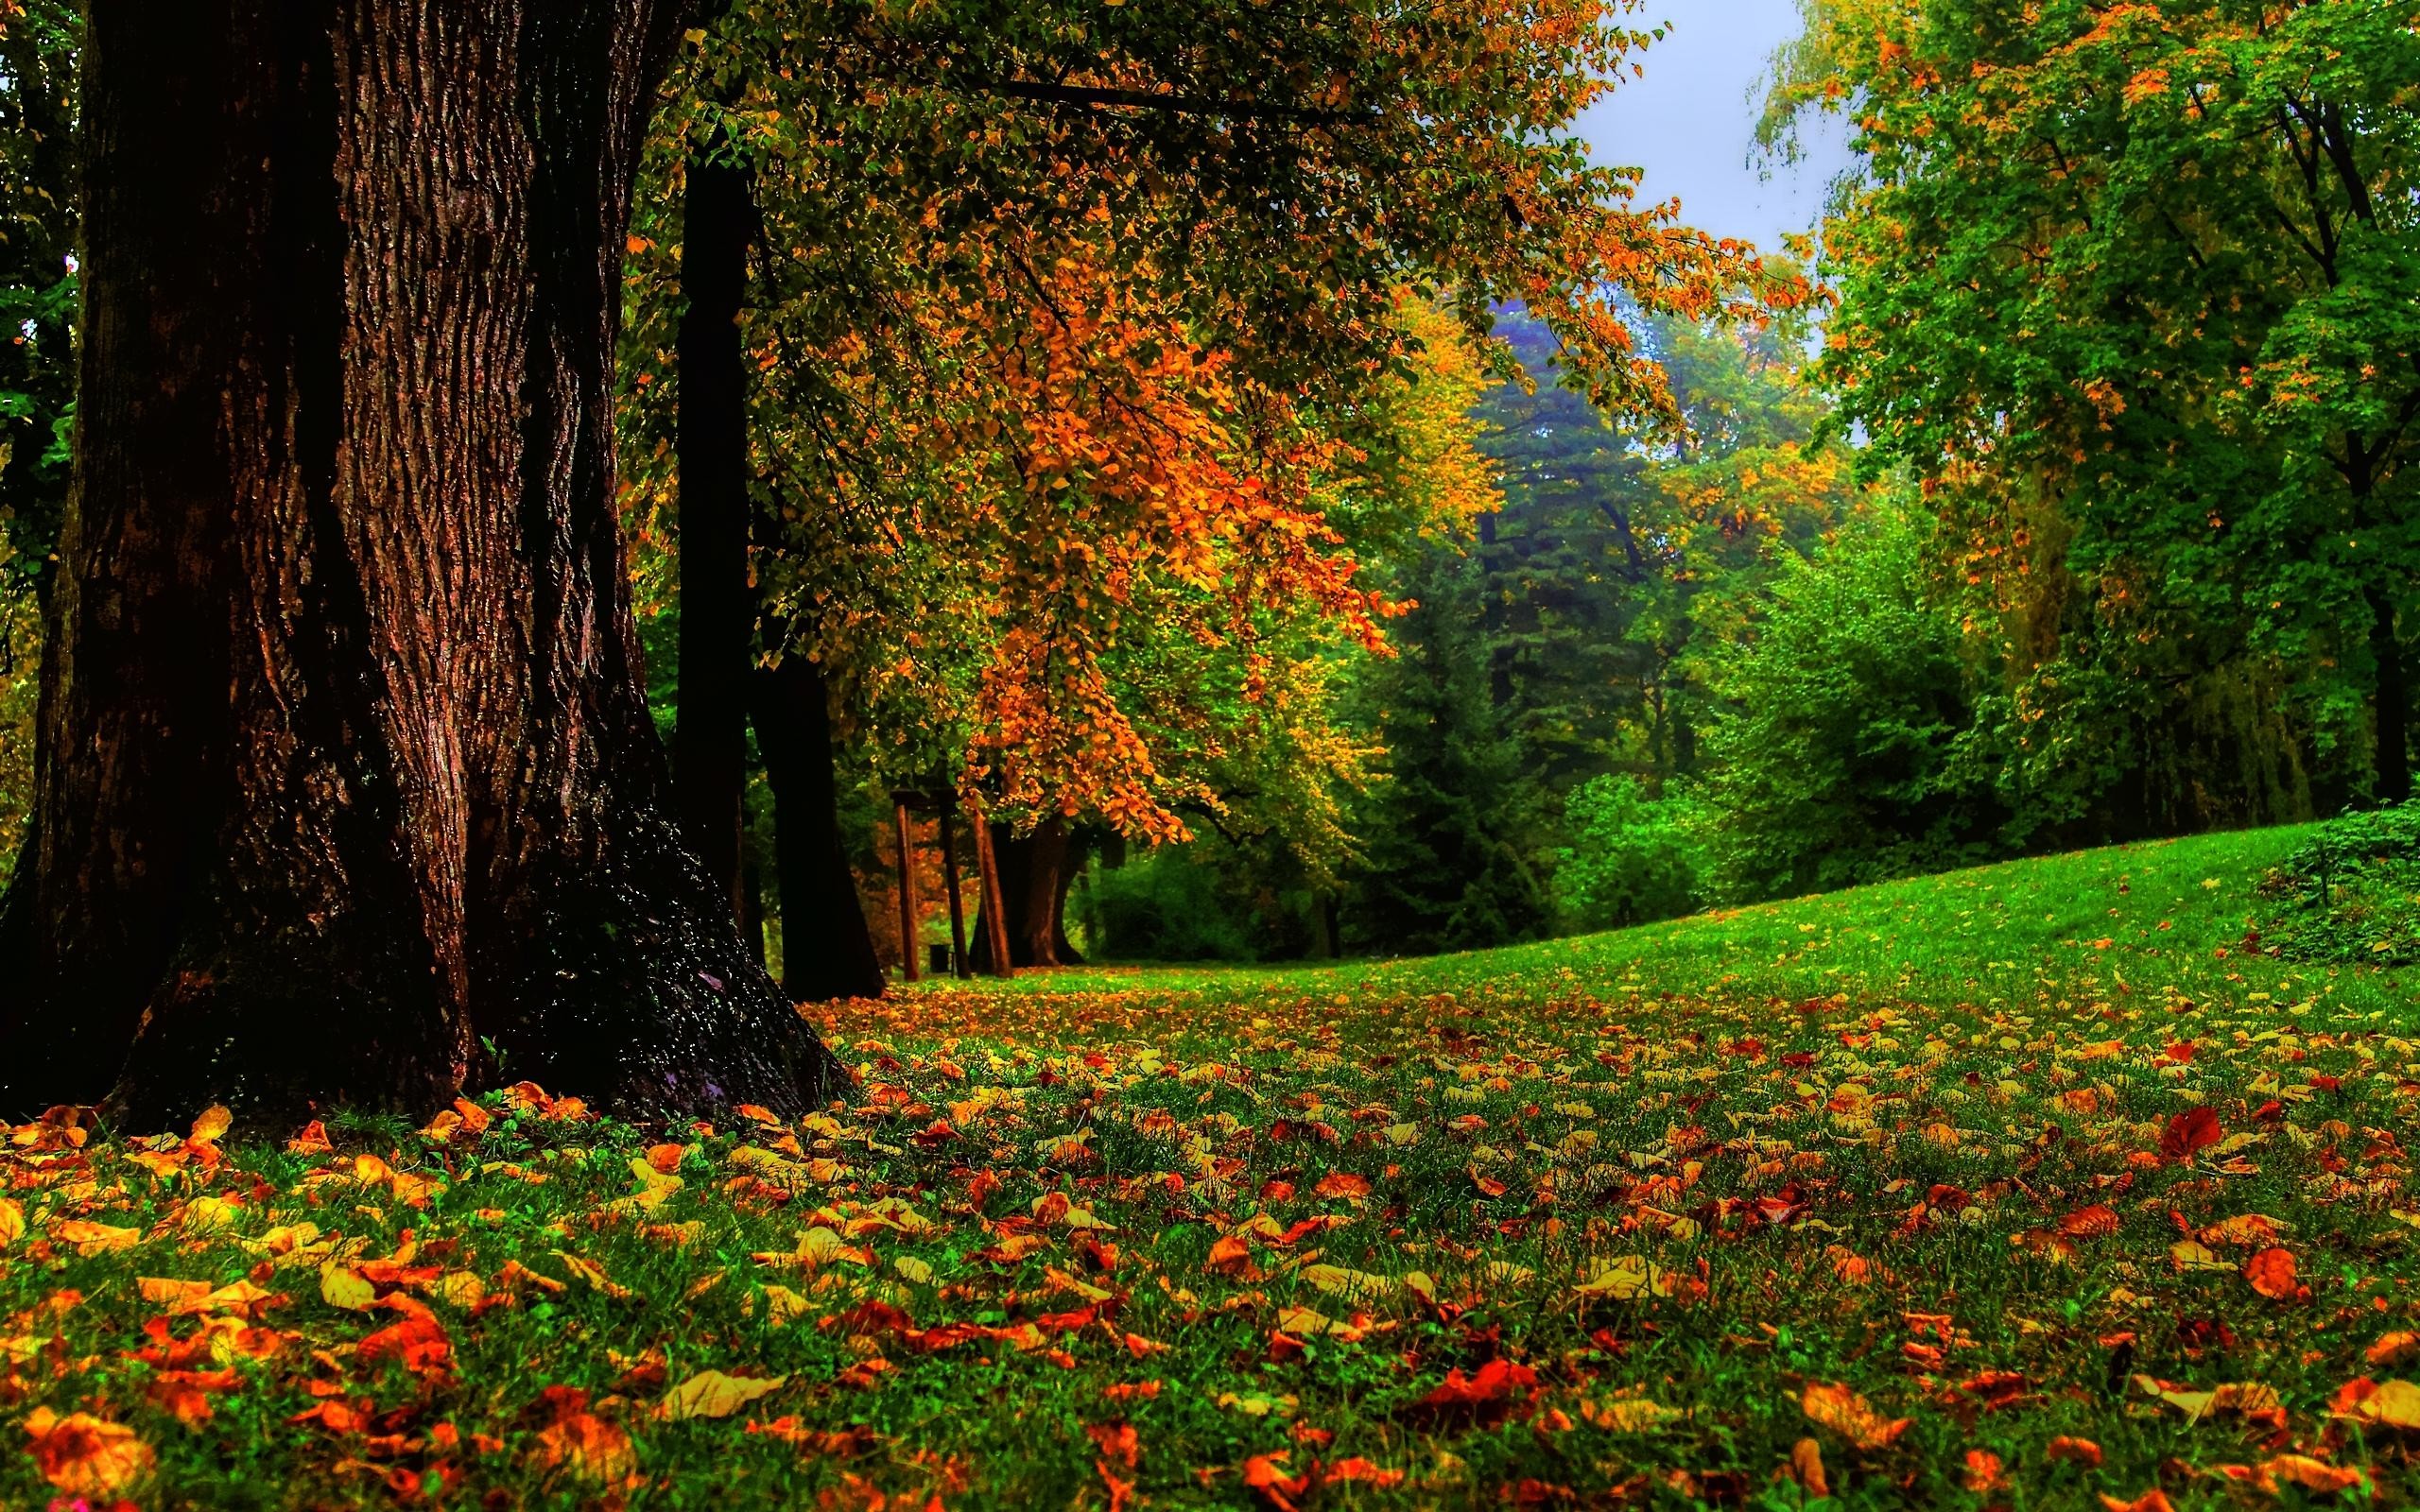 General 2560x1600 nature fall landscape trees fallen leaves